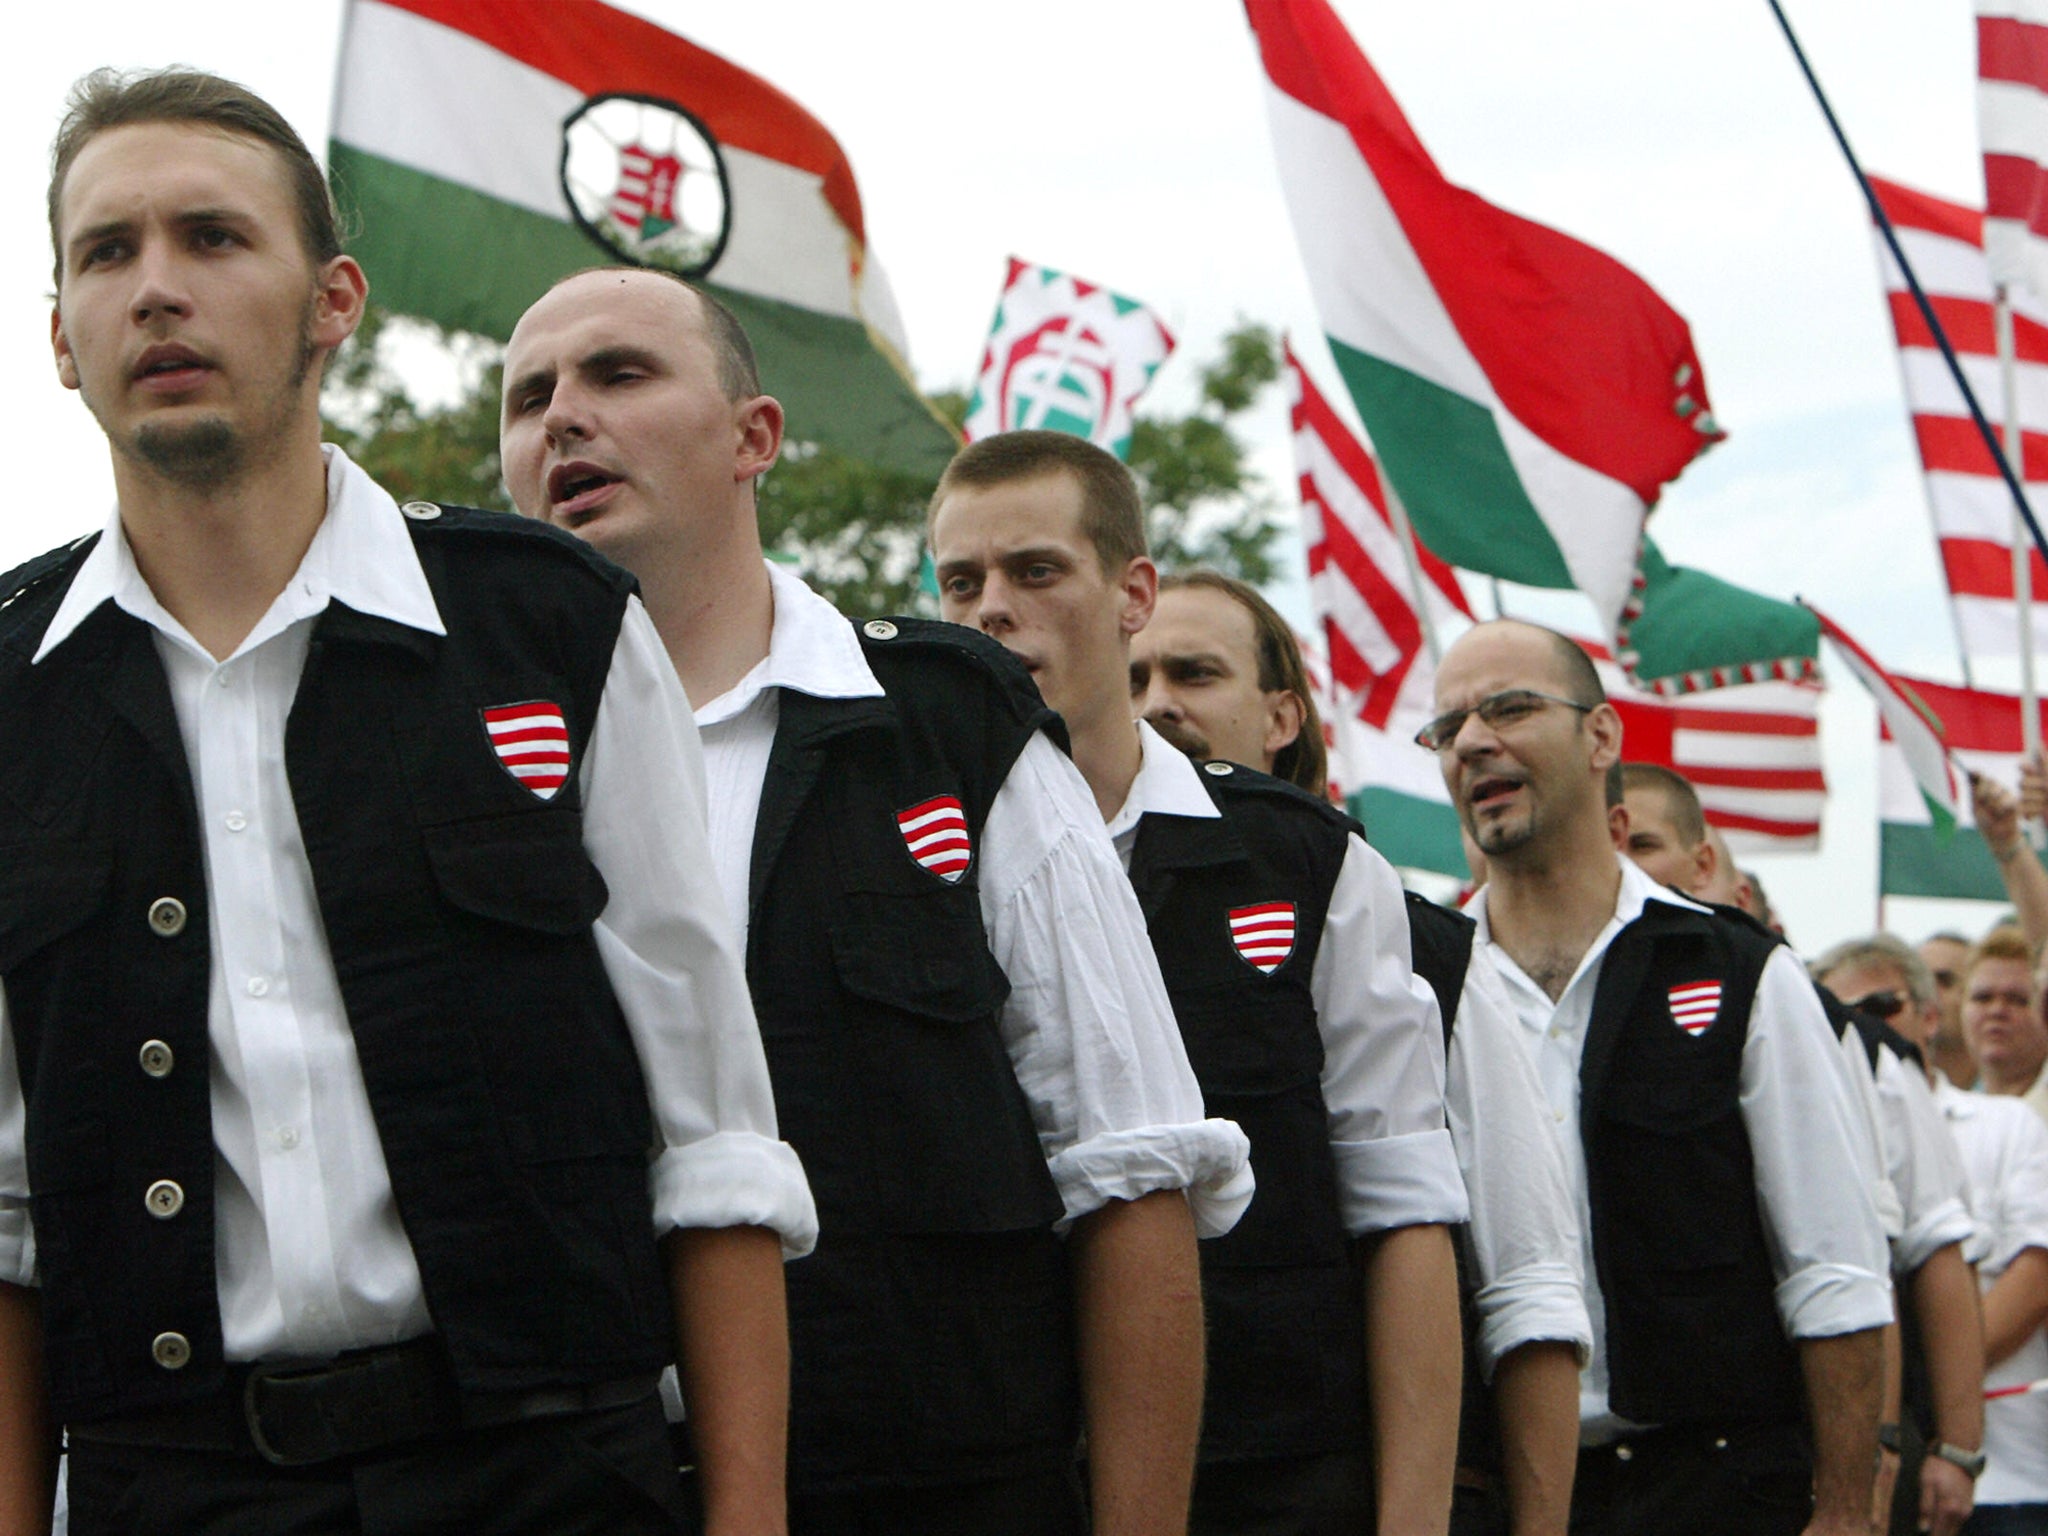 Members of Jobbik take an oath to join the Magyar Garda, a group pledging to 'defend Hungary physically, morally and mentally'